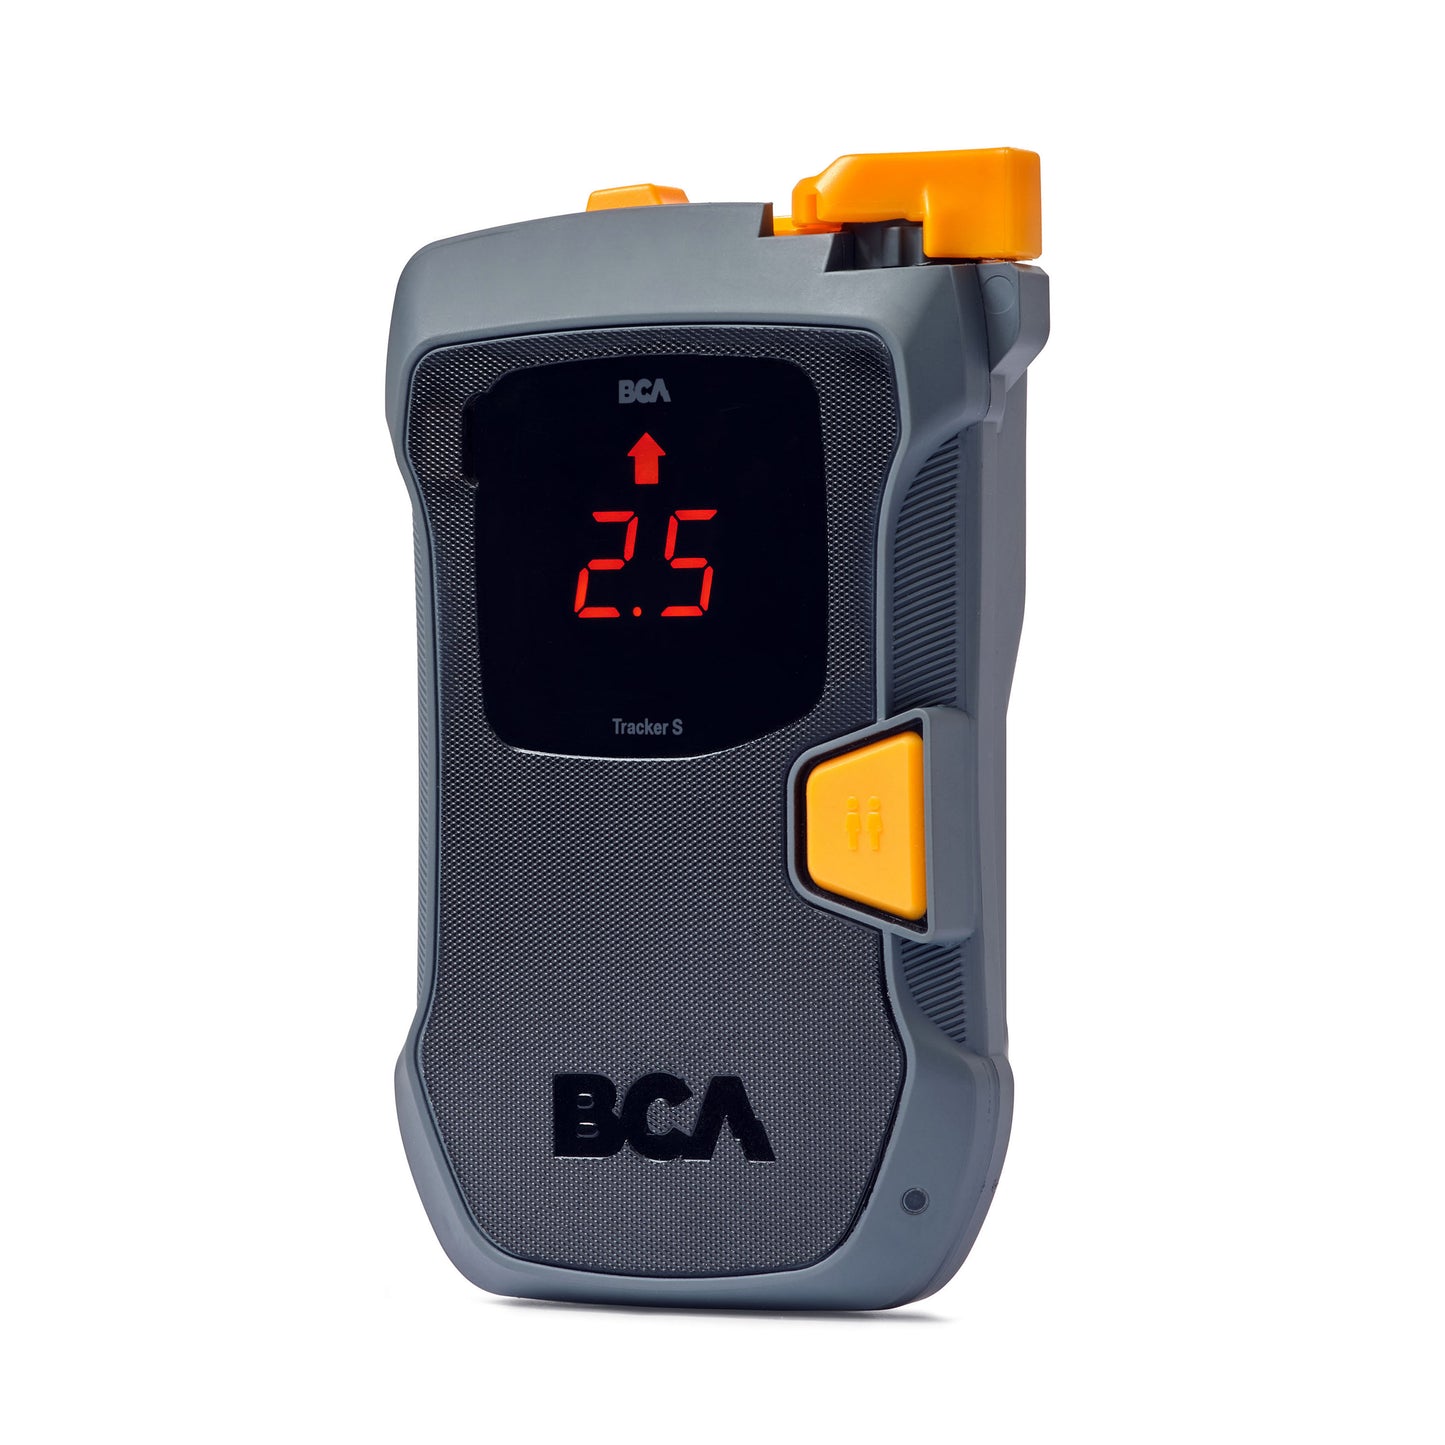 NEW BCA Tracker 'S' Digital Avalanche Transceiver for Optimum Safety with 5 Year Warranty